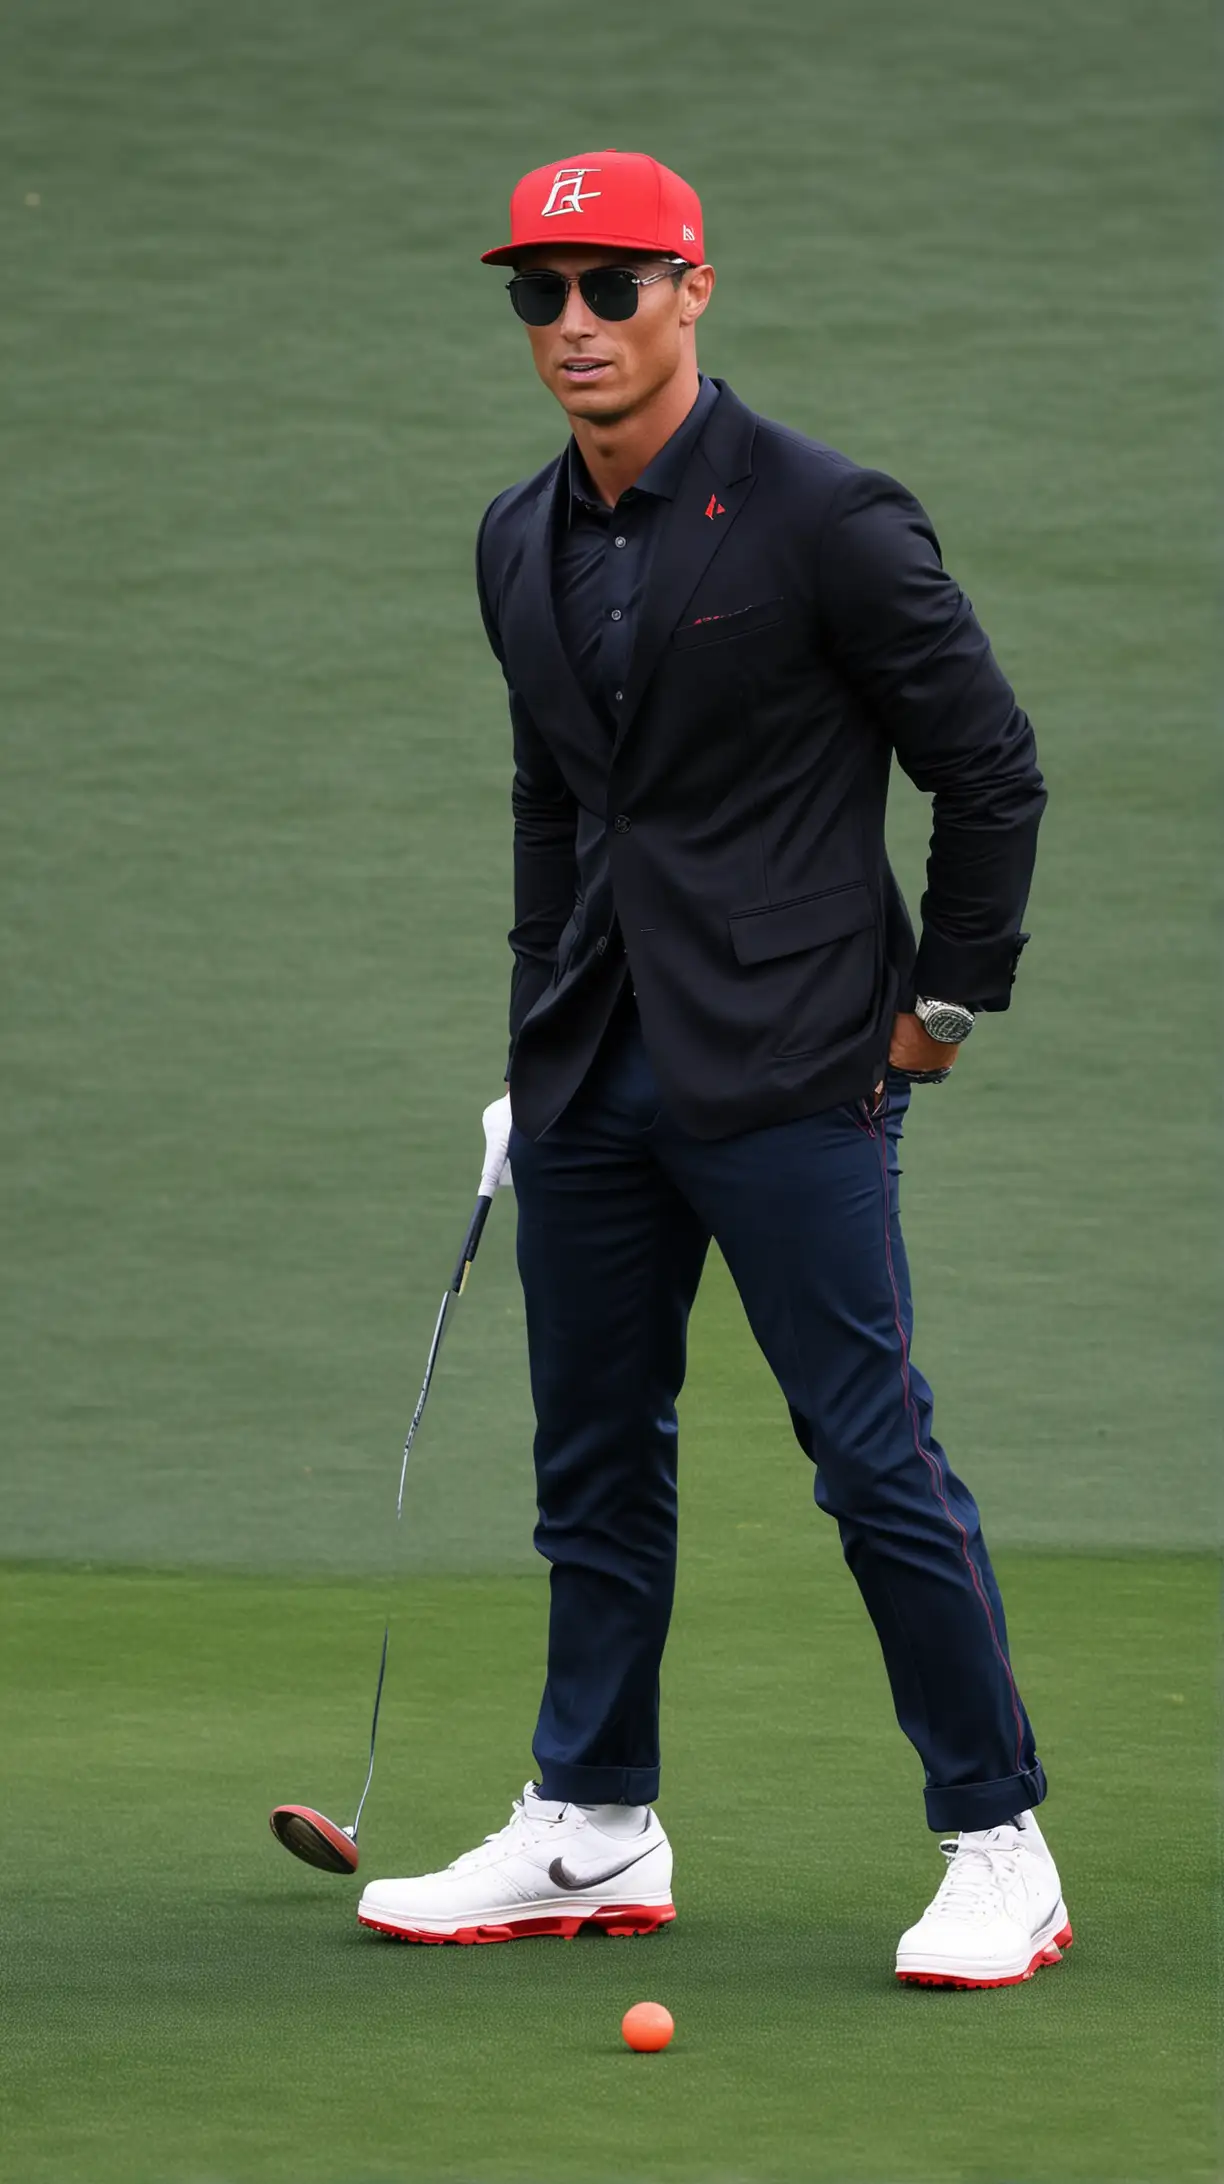 Cristiano Ronaldo black jacket red hat blue pants white shoes. Playing Golf Glasses hat. Long front shot